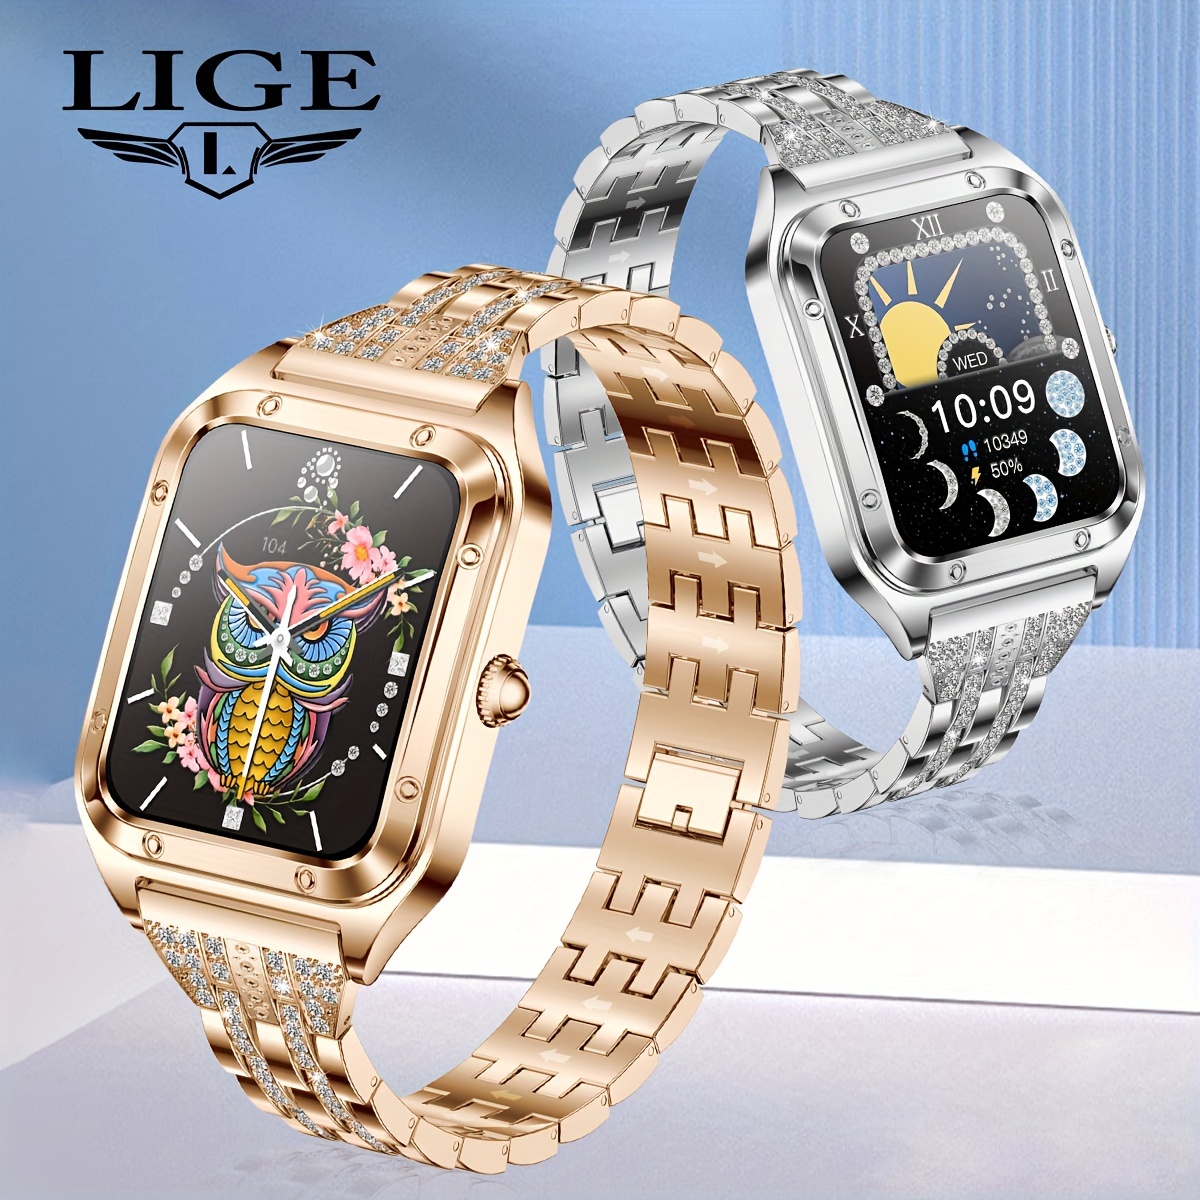 

Lige 1.59" Hd Touch Screen Smart Watch, Wireless Calling & Messaging, Waterproof, Long Battery Life, Multiple Sports Modes, Compatible With Android & Ios, Activity For Men And Women